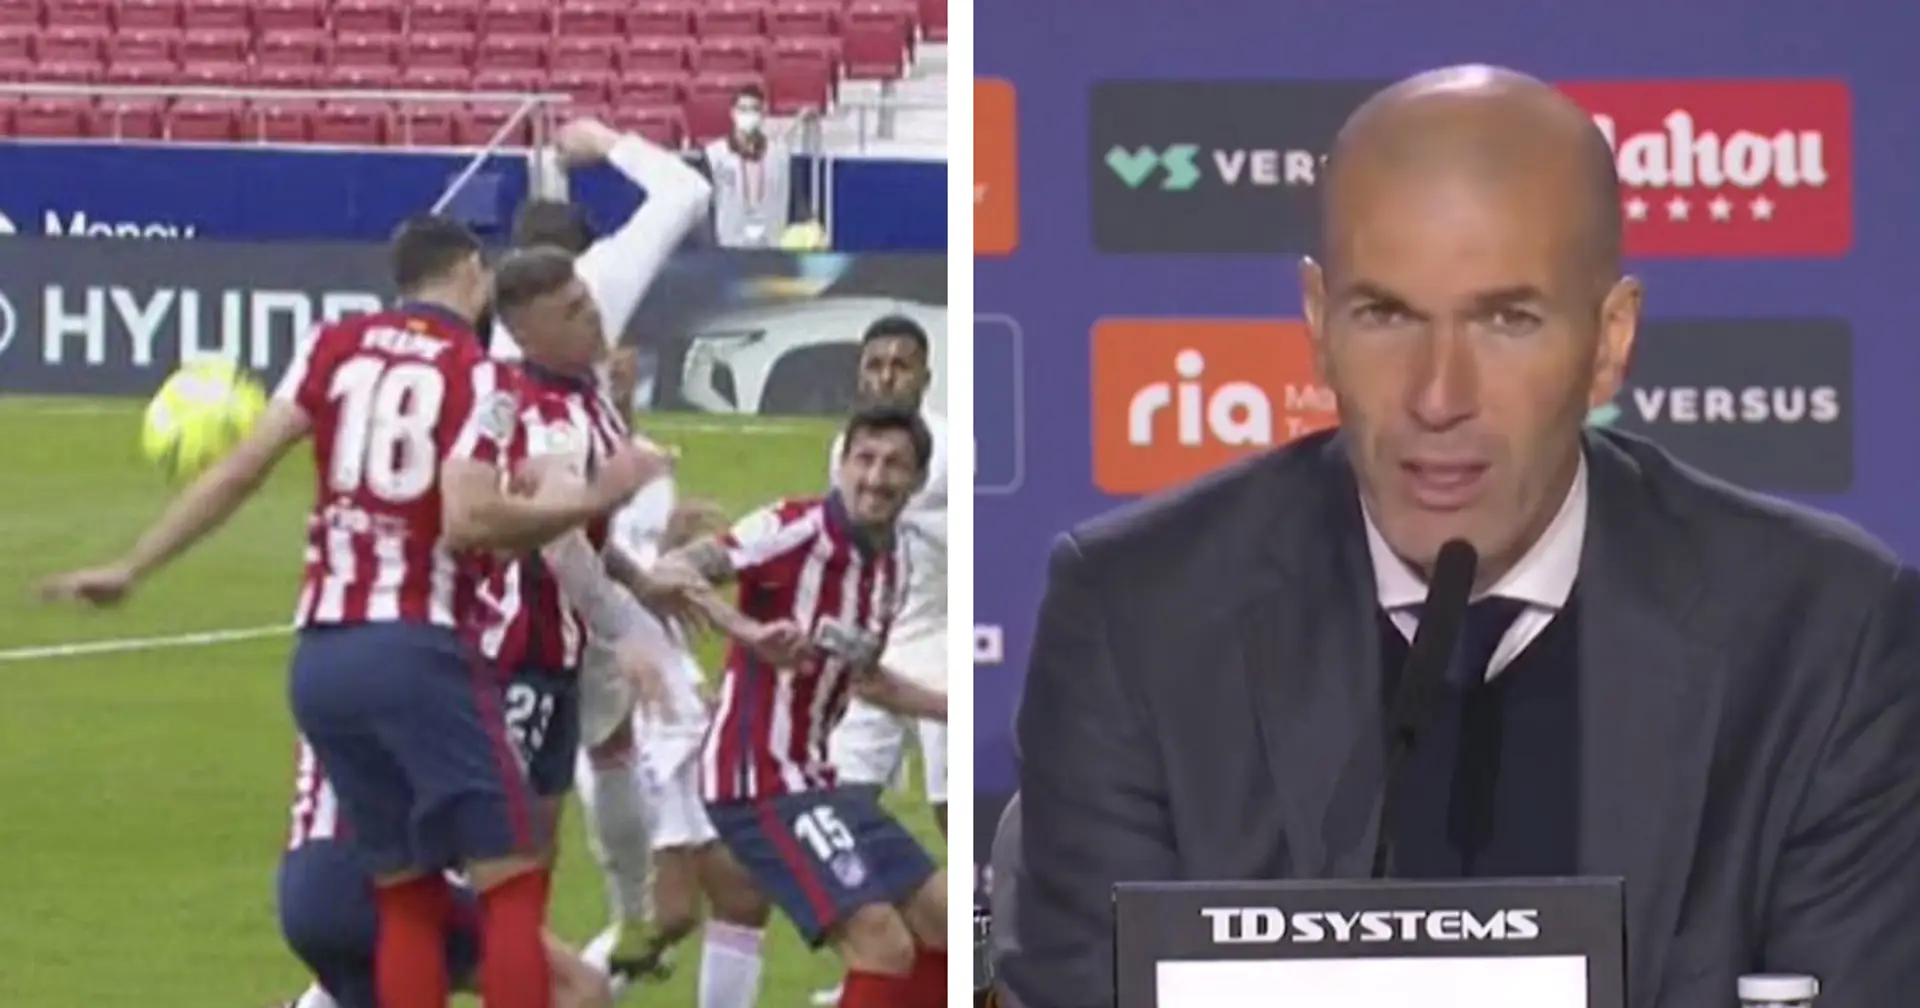 'Players told me it was handball': Zidane reacts to penalty controversy